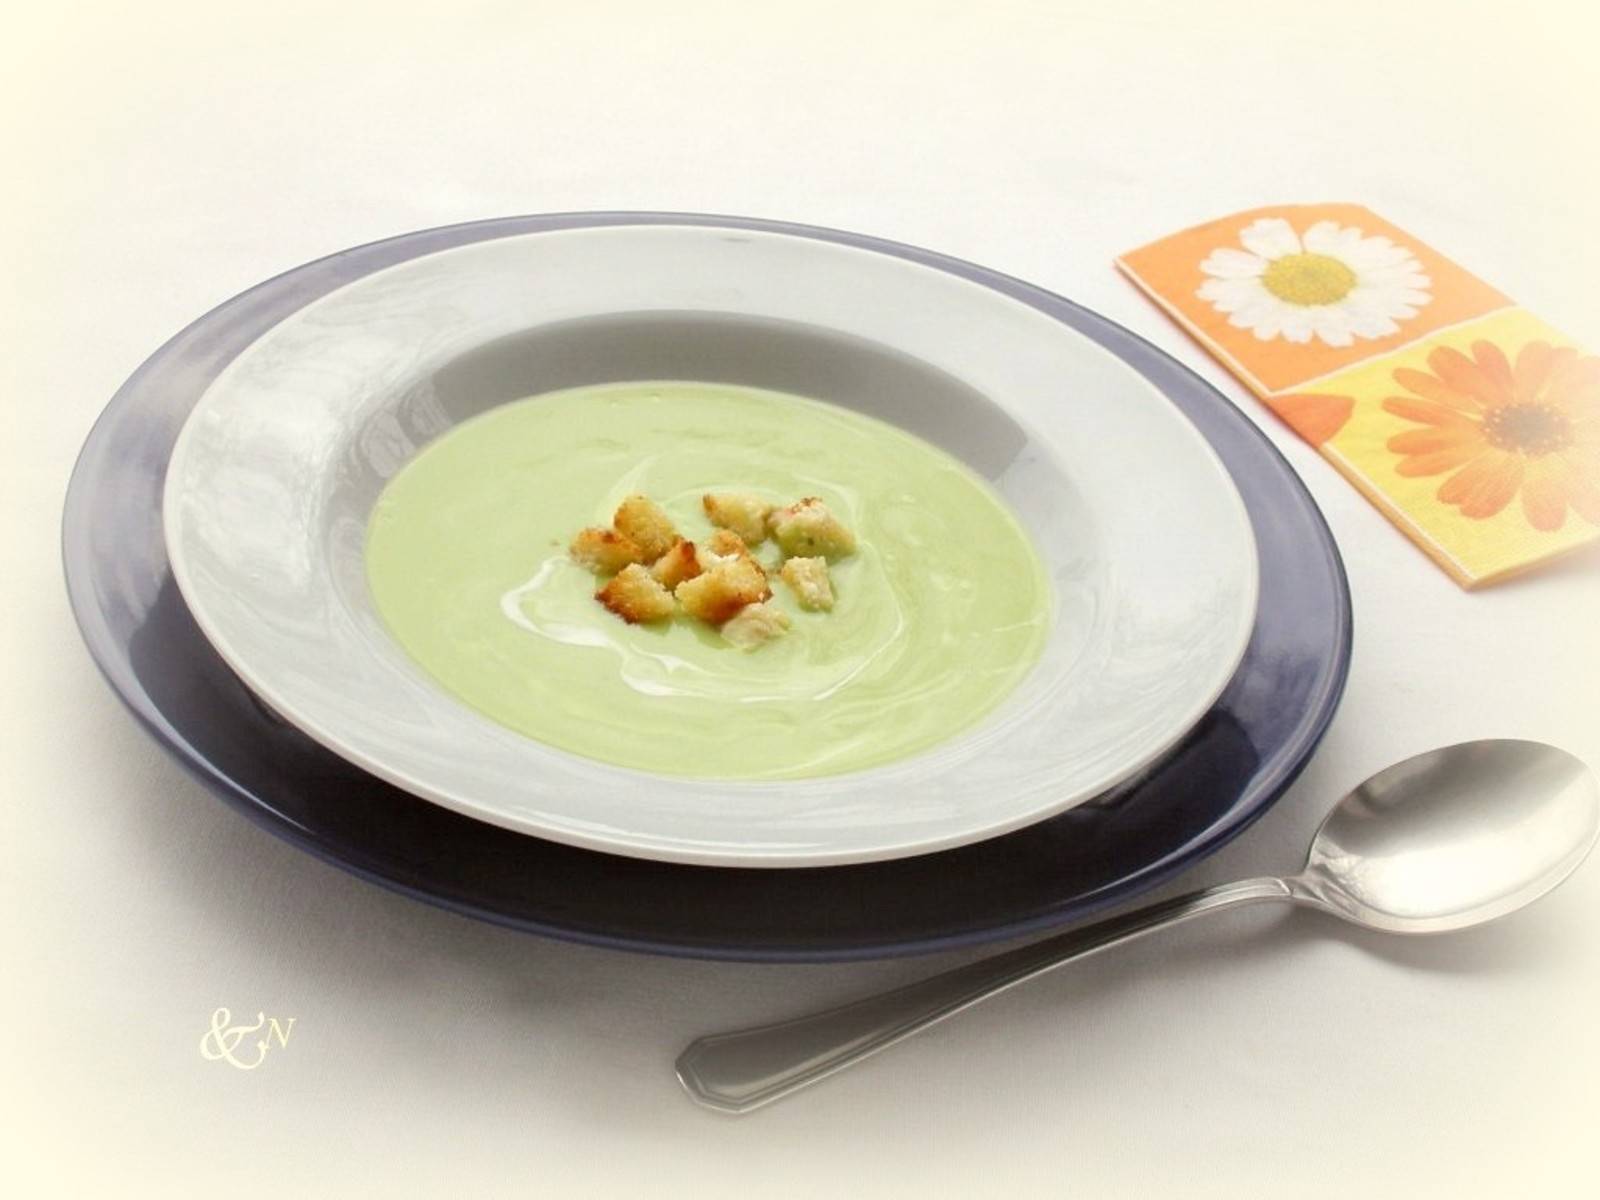 Avocadosuppe mit Knoblauchcroutons